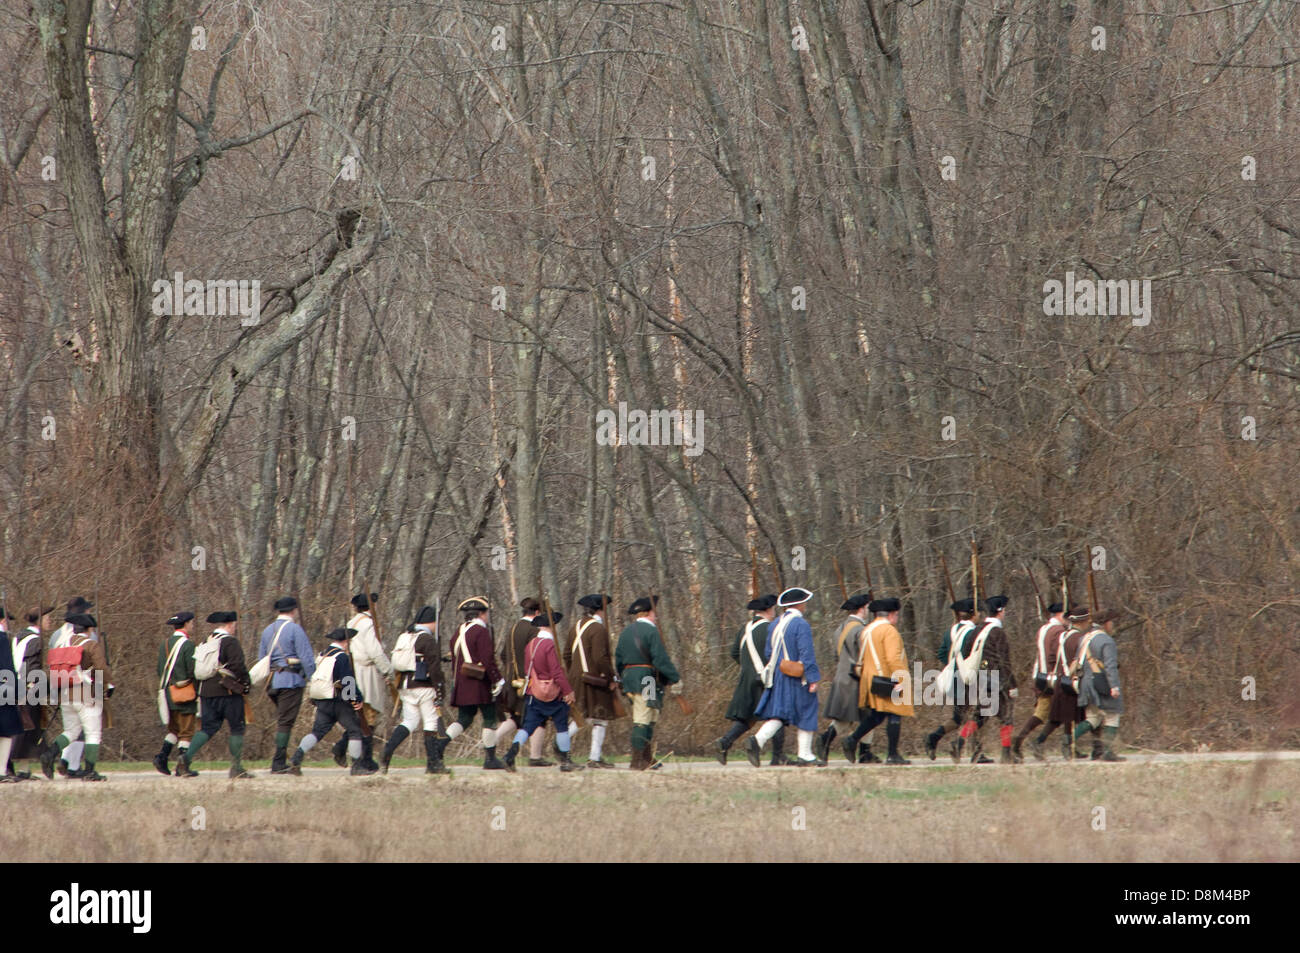 Minutemen reenactors marching to battle the British at the Battle of Concord, Minuteman National Historical Park, Concord MA.  Digital photograph Stock Photo